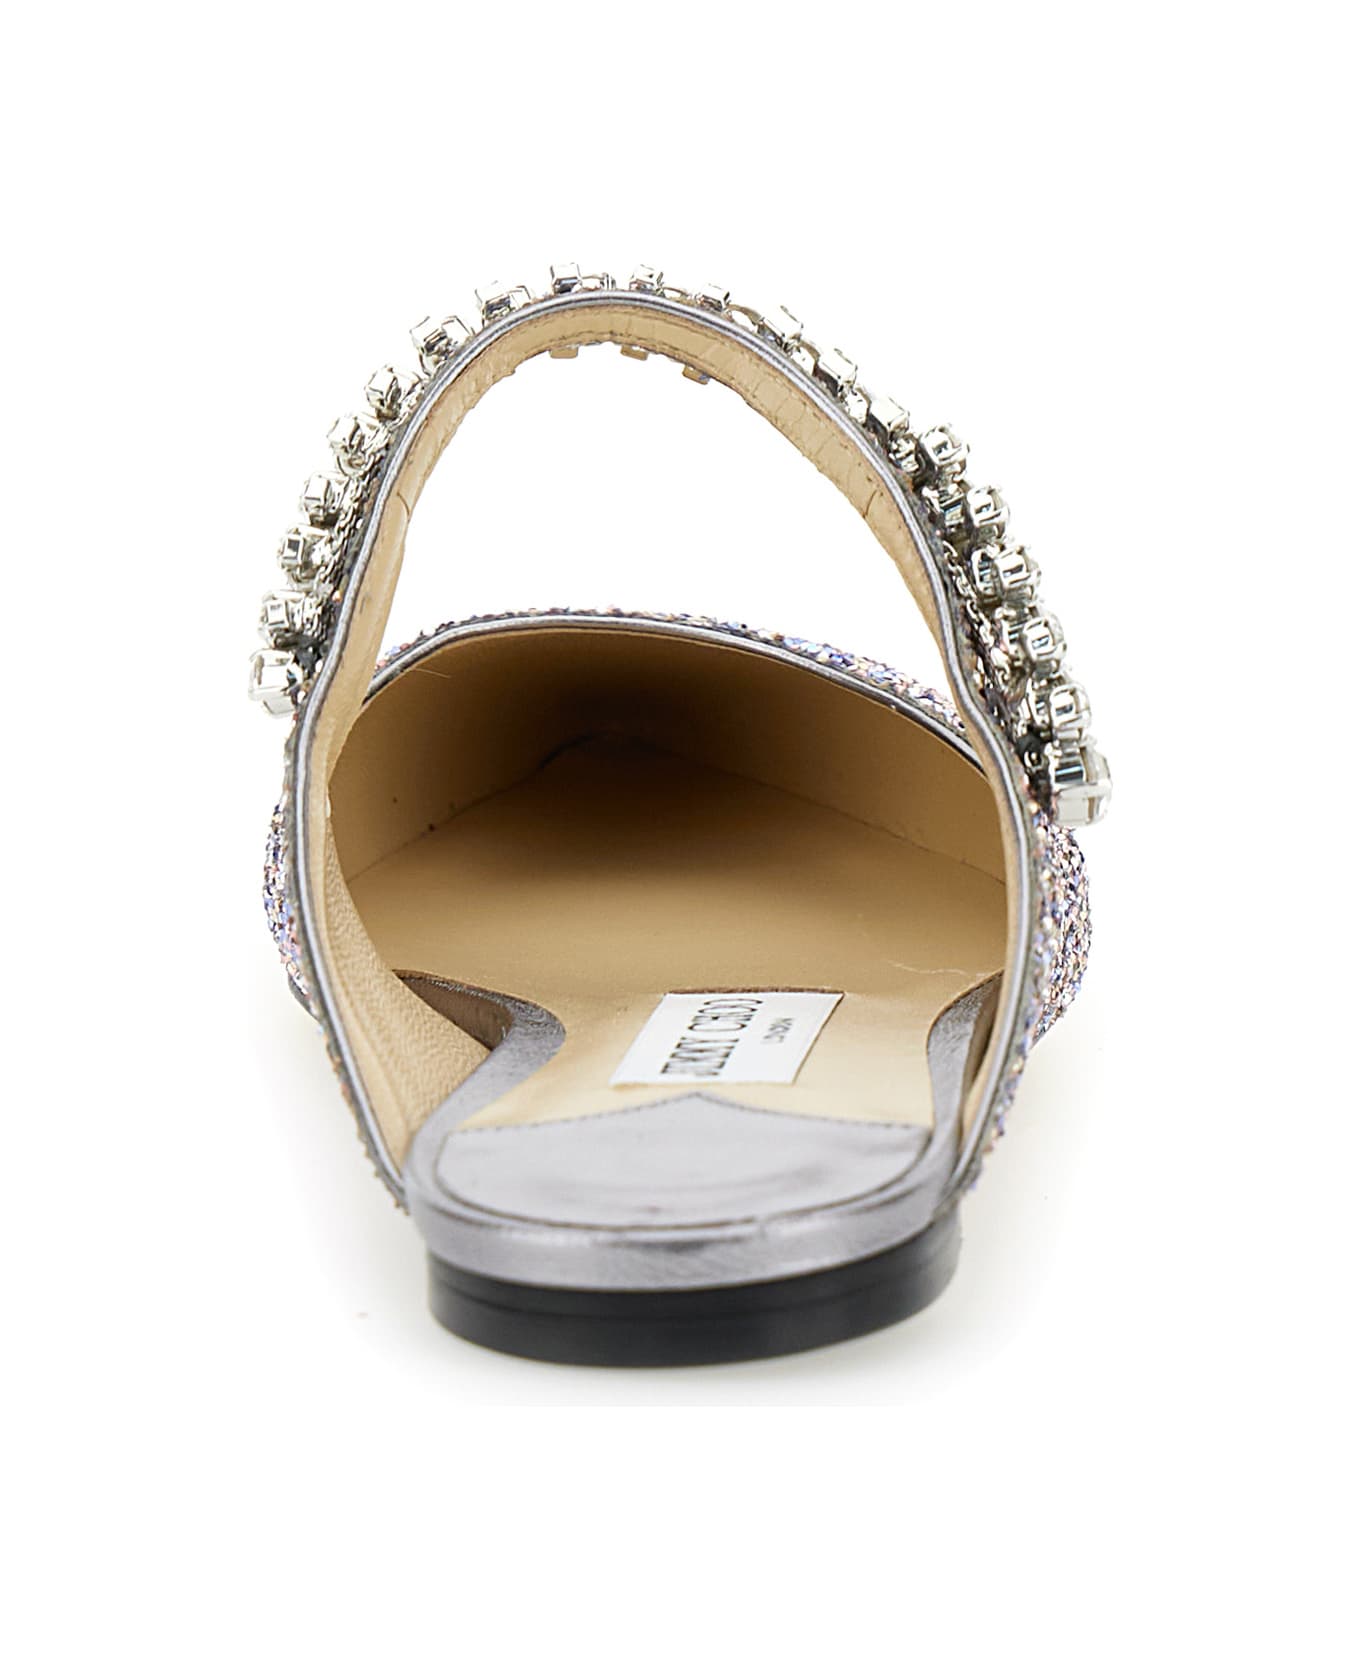 Jimmy Choo 'bling Flat' Multicolor Mules With Crystal Strap In Glitter Fabric Woman - Metallic